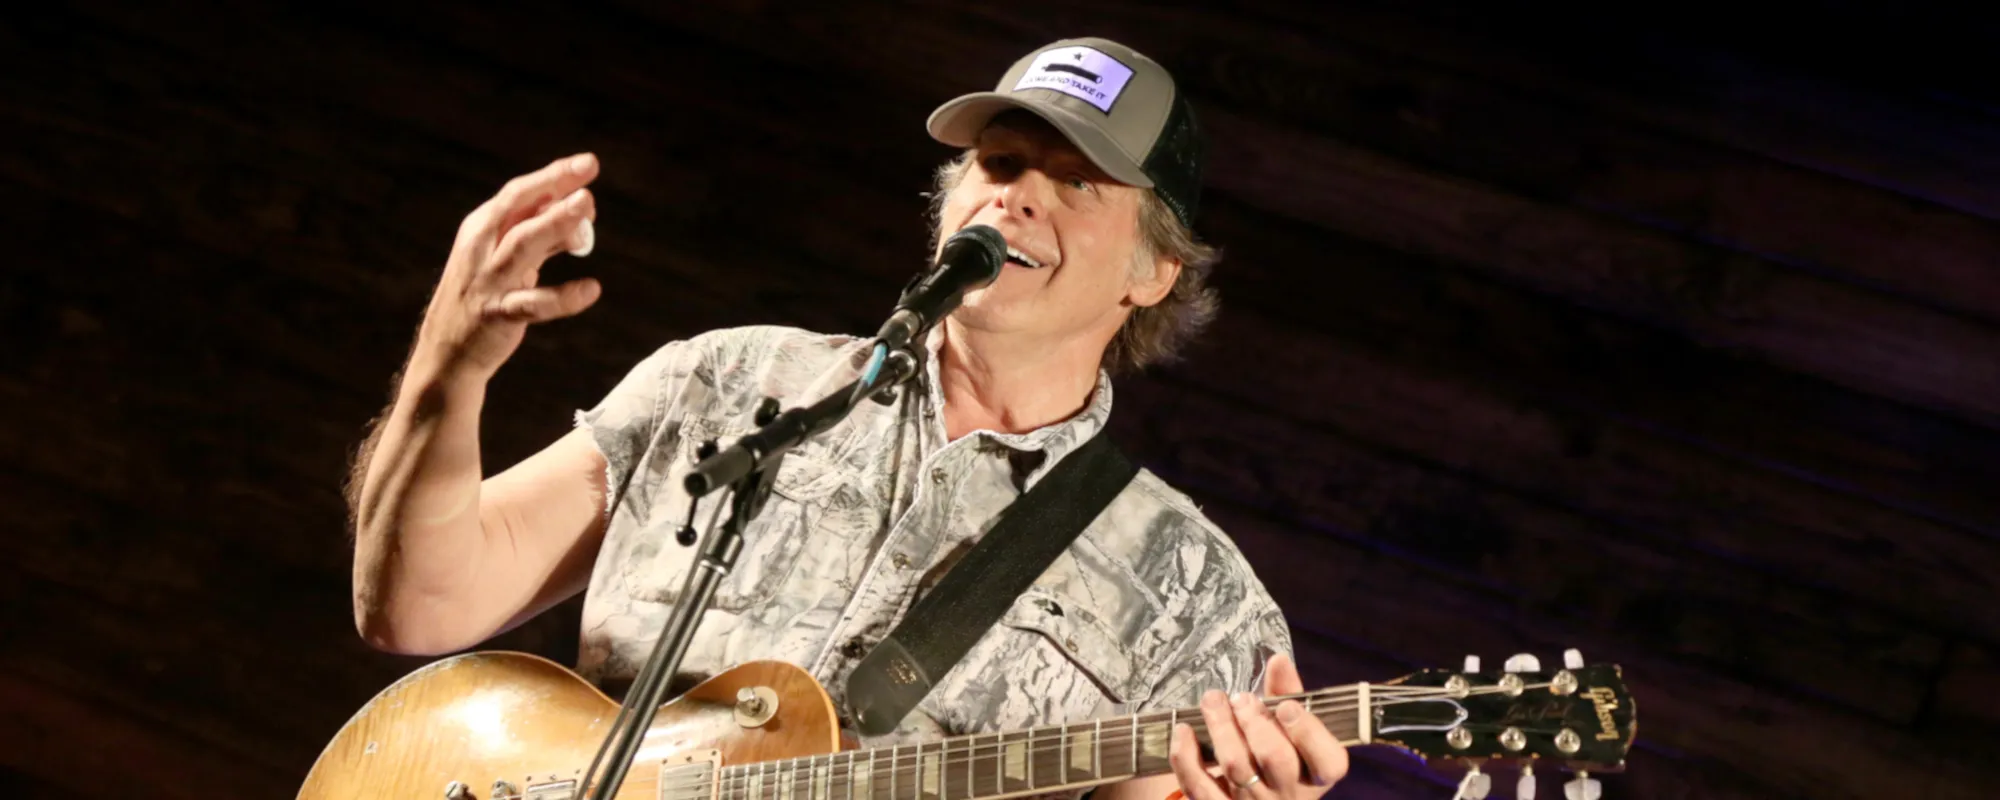 Ted Nugent Responds to KISS’ Gene Simmons Vaccination Comments: “Not Truth”; Offers Gift to Kyle Rittenhouse